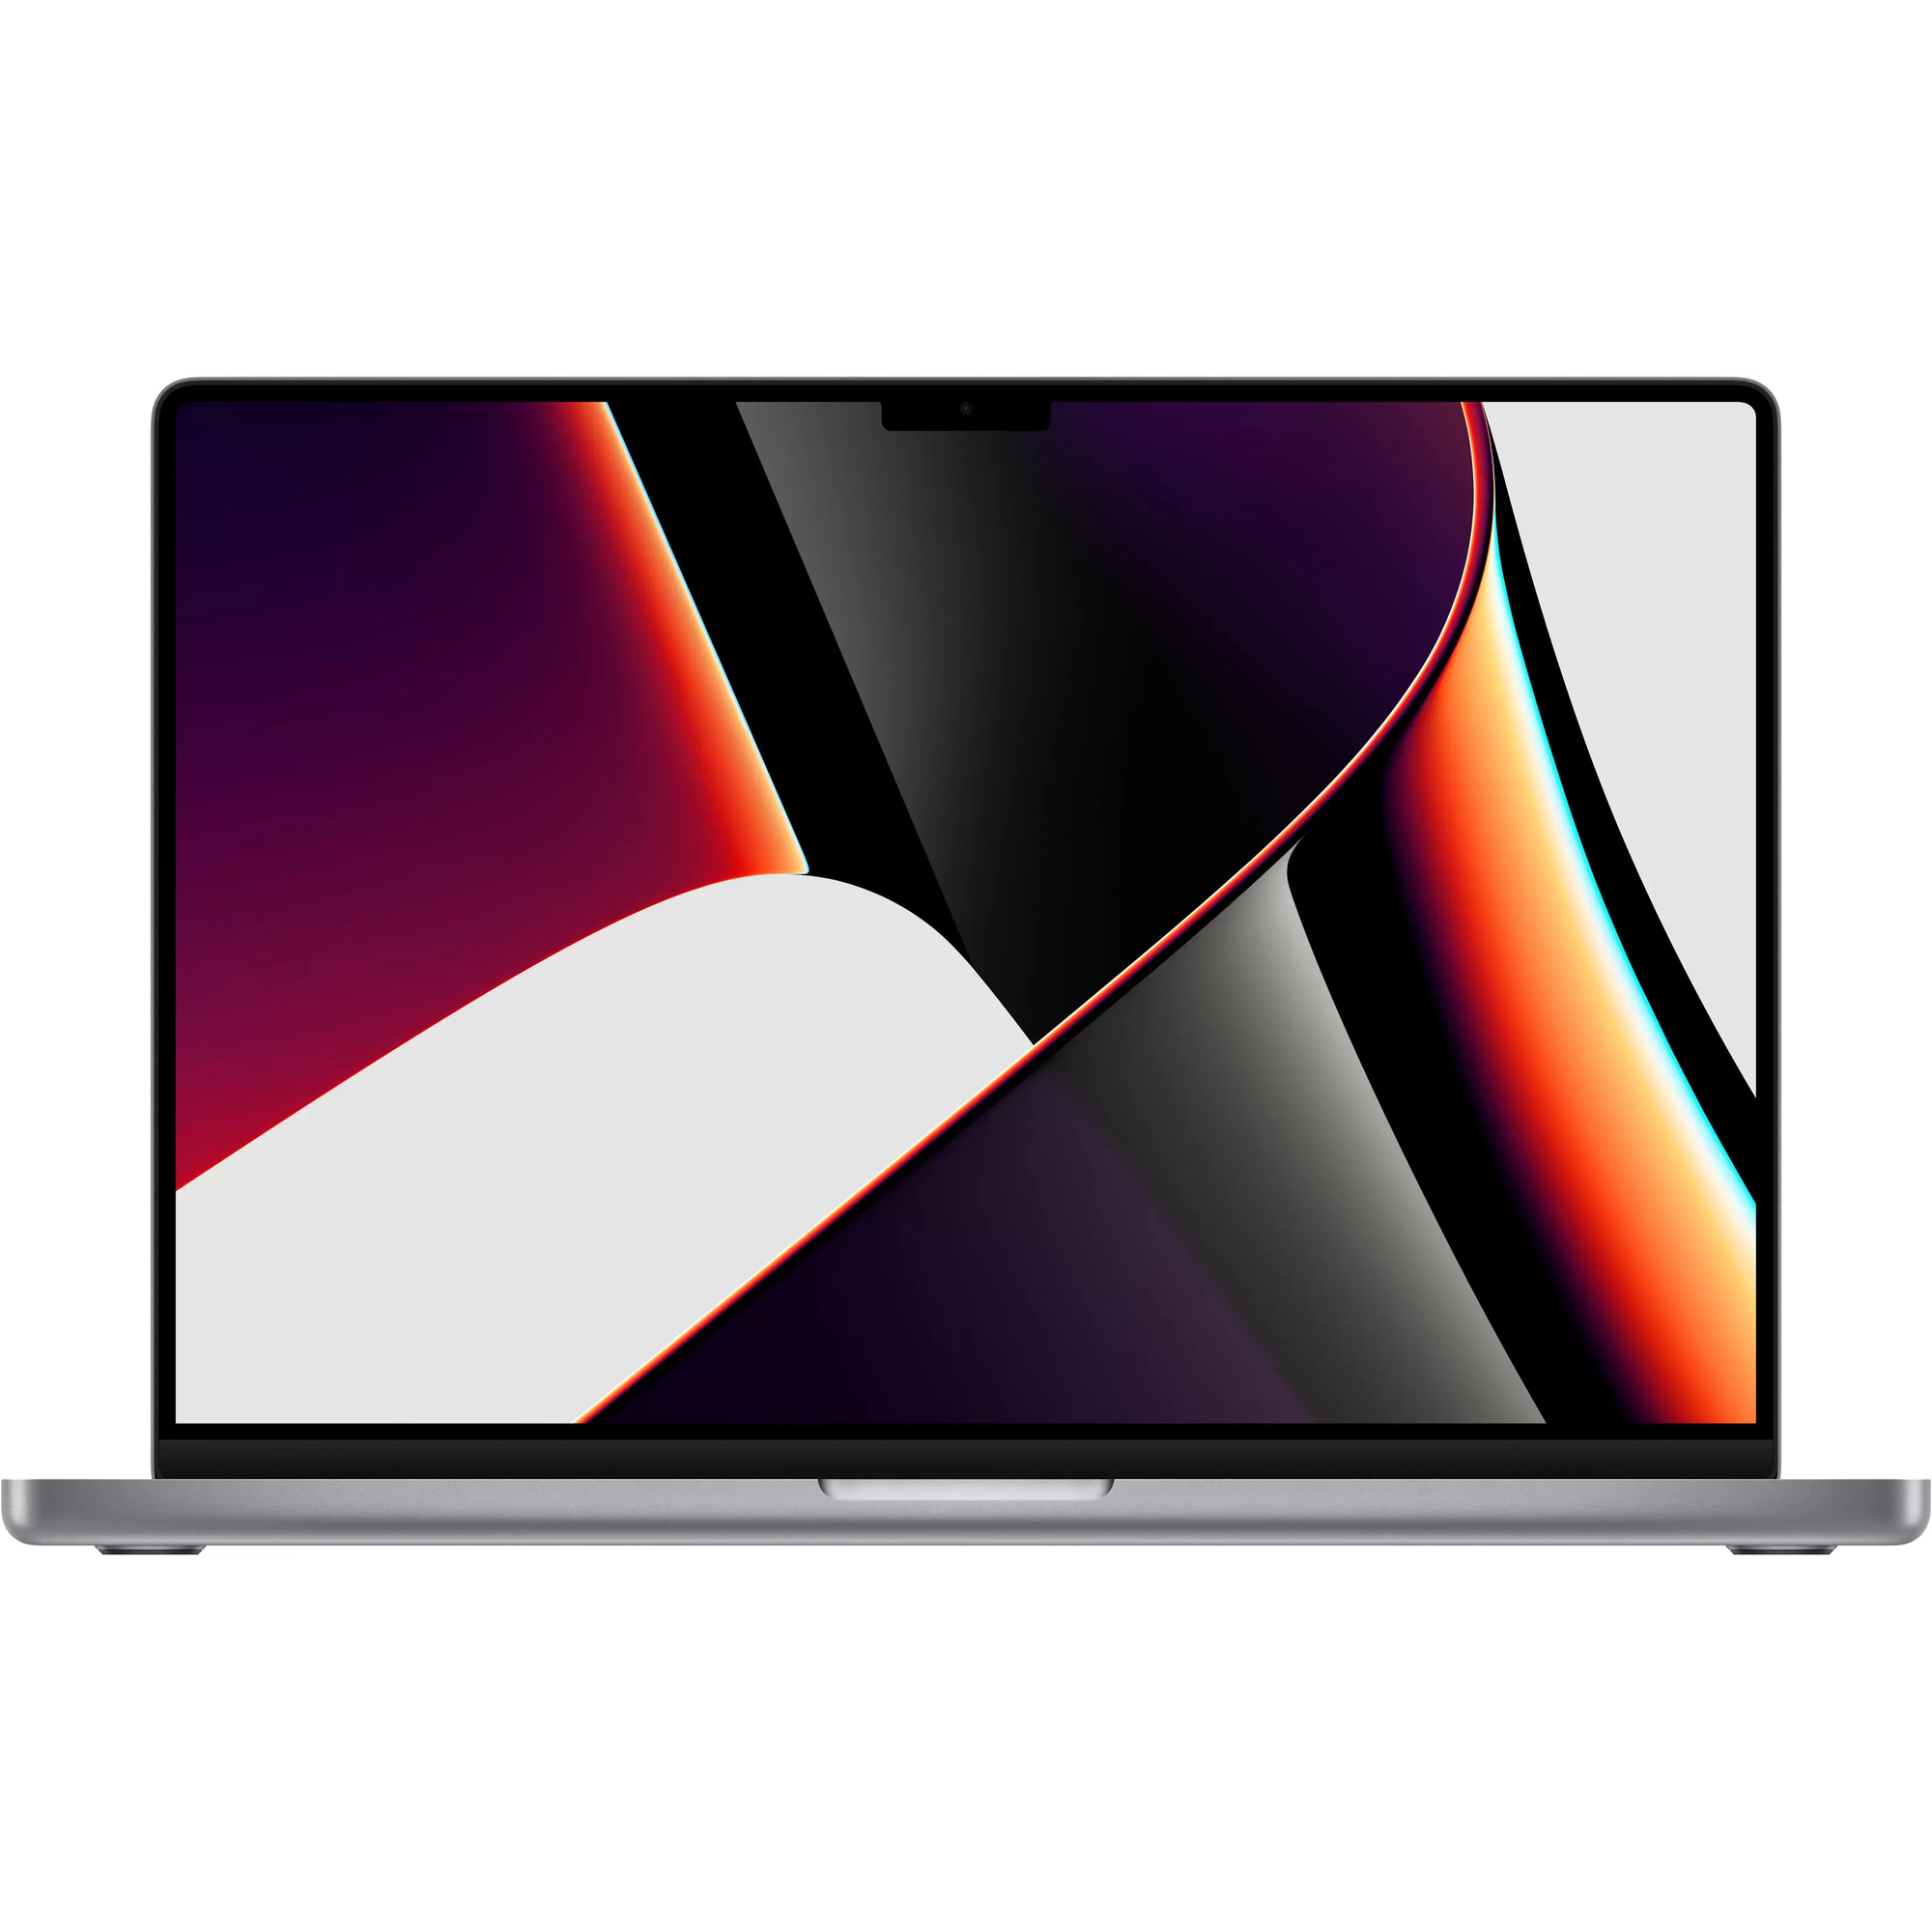 16-inch MacBook Pro: Apple M1 Pro chip with 10‑core CPU and 16‑core GPU, 512GB SSD - Space Grey, Mod